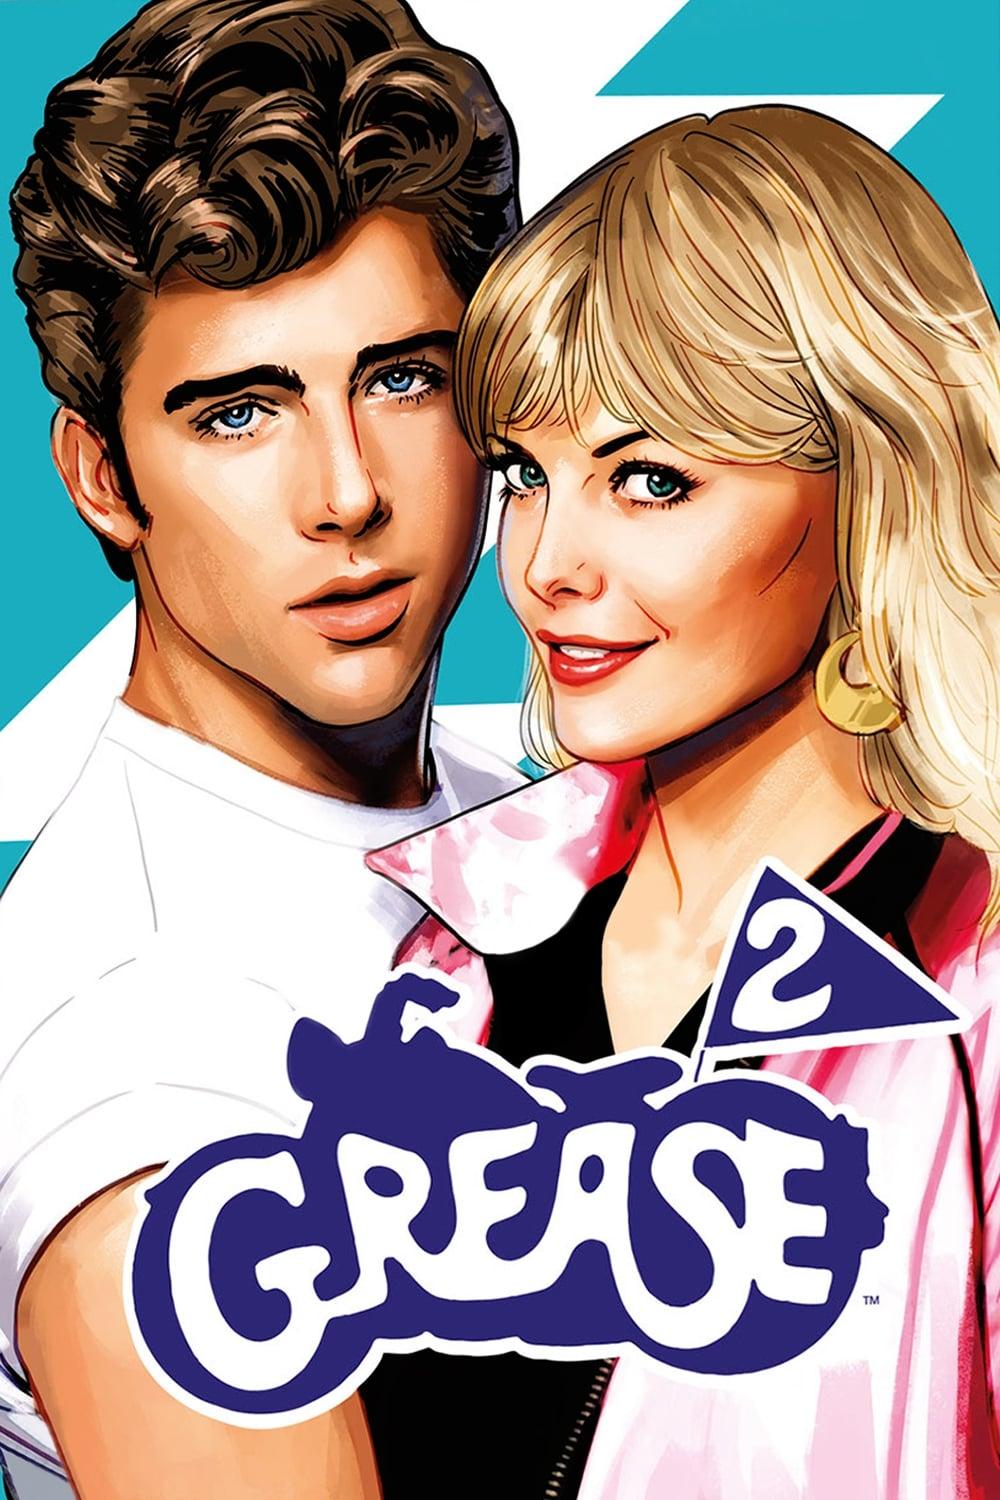 Grease 2 poster